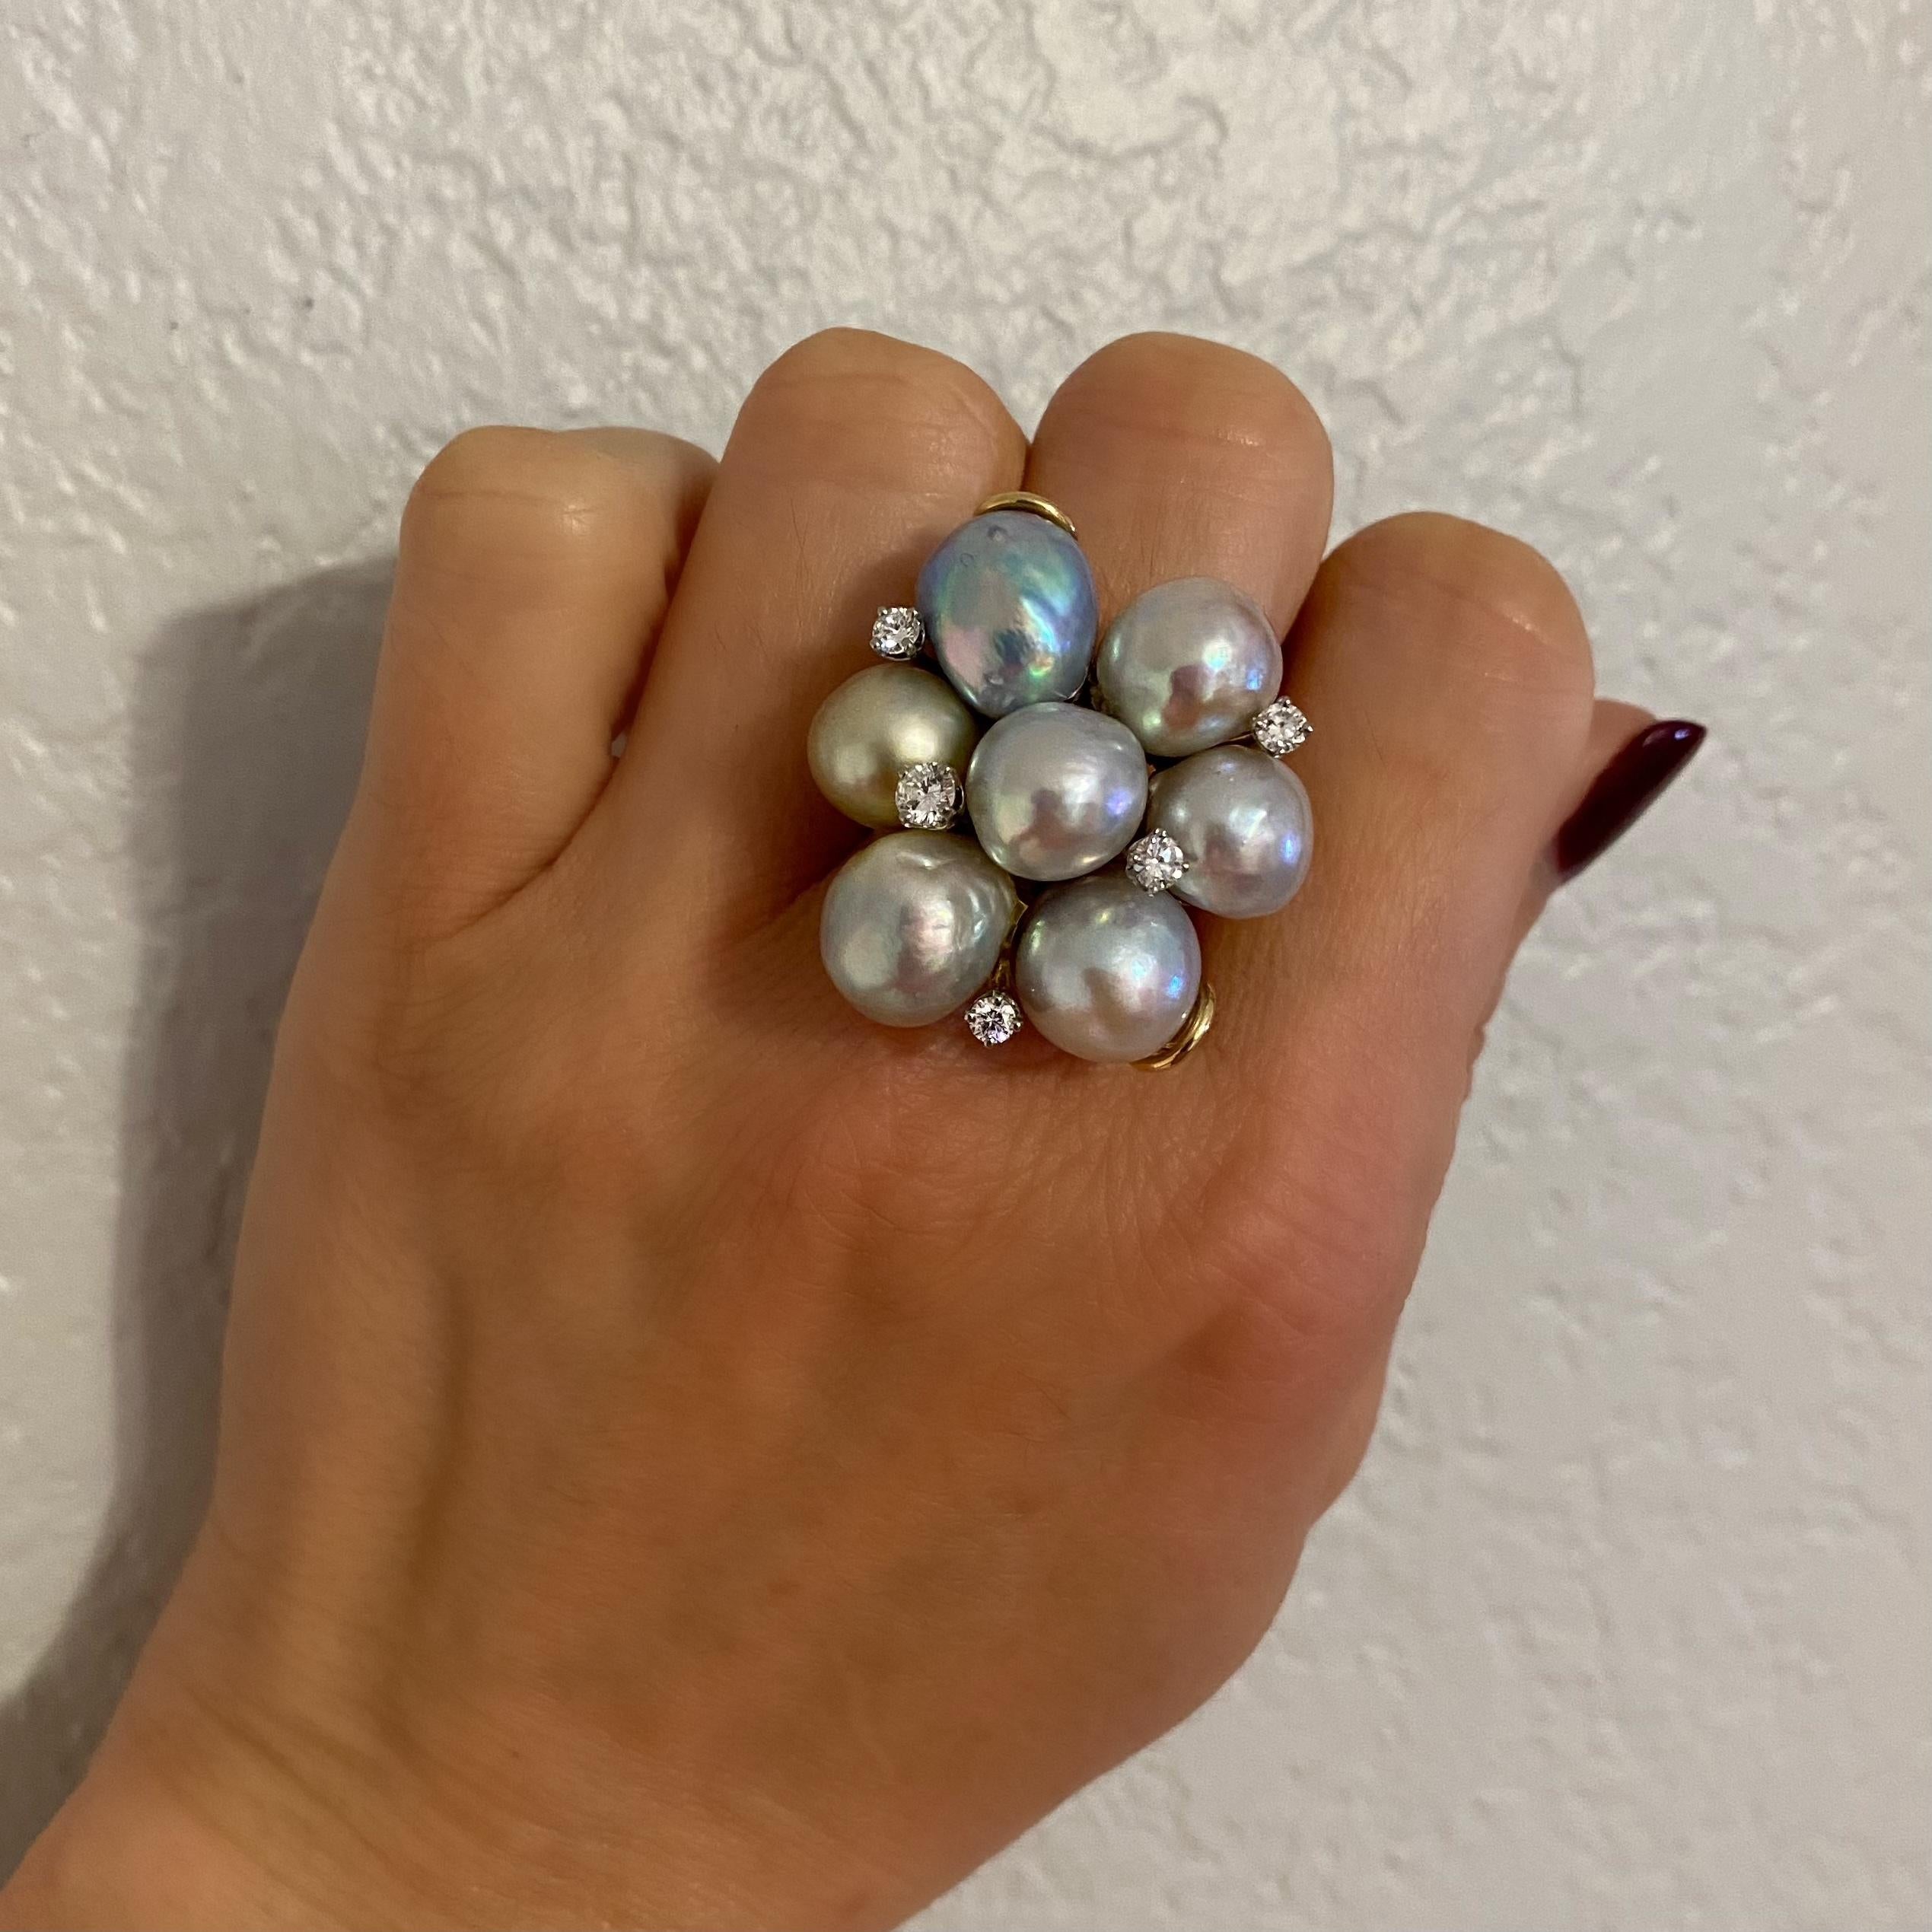 Simply Beautiful, Elegant and finely detailed Cocktail Cluster Ring, set with 7 freshwater Pearls, each measuring approx. 10-14mm and 5 round brilliant-cut Diamonds, approx. total carat weight of Diamonds 0.58 Carats. Measures approx. 1.14”w x